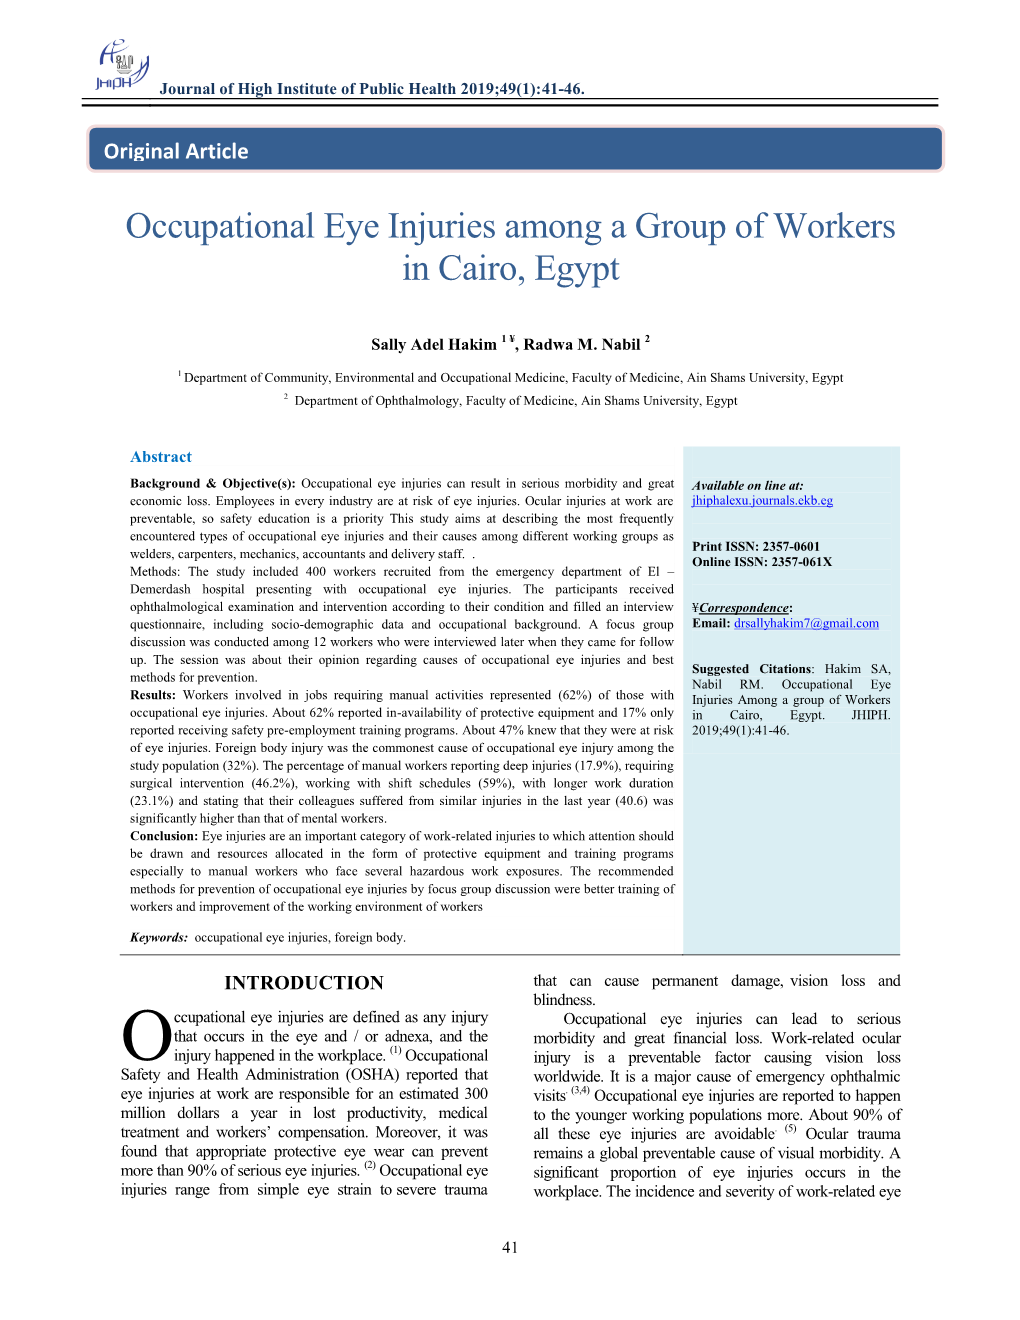 Occupational Eye Injuries Among a Group of Workers in Cairo, Egypt